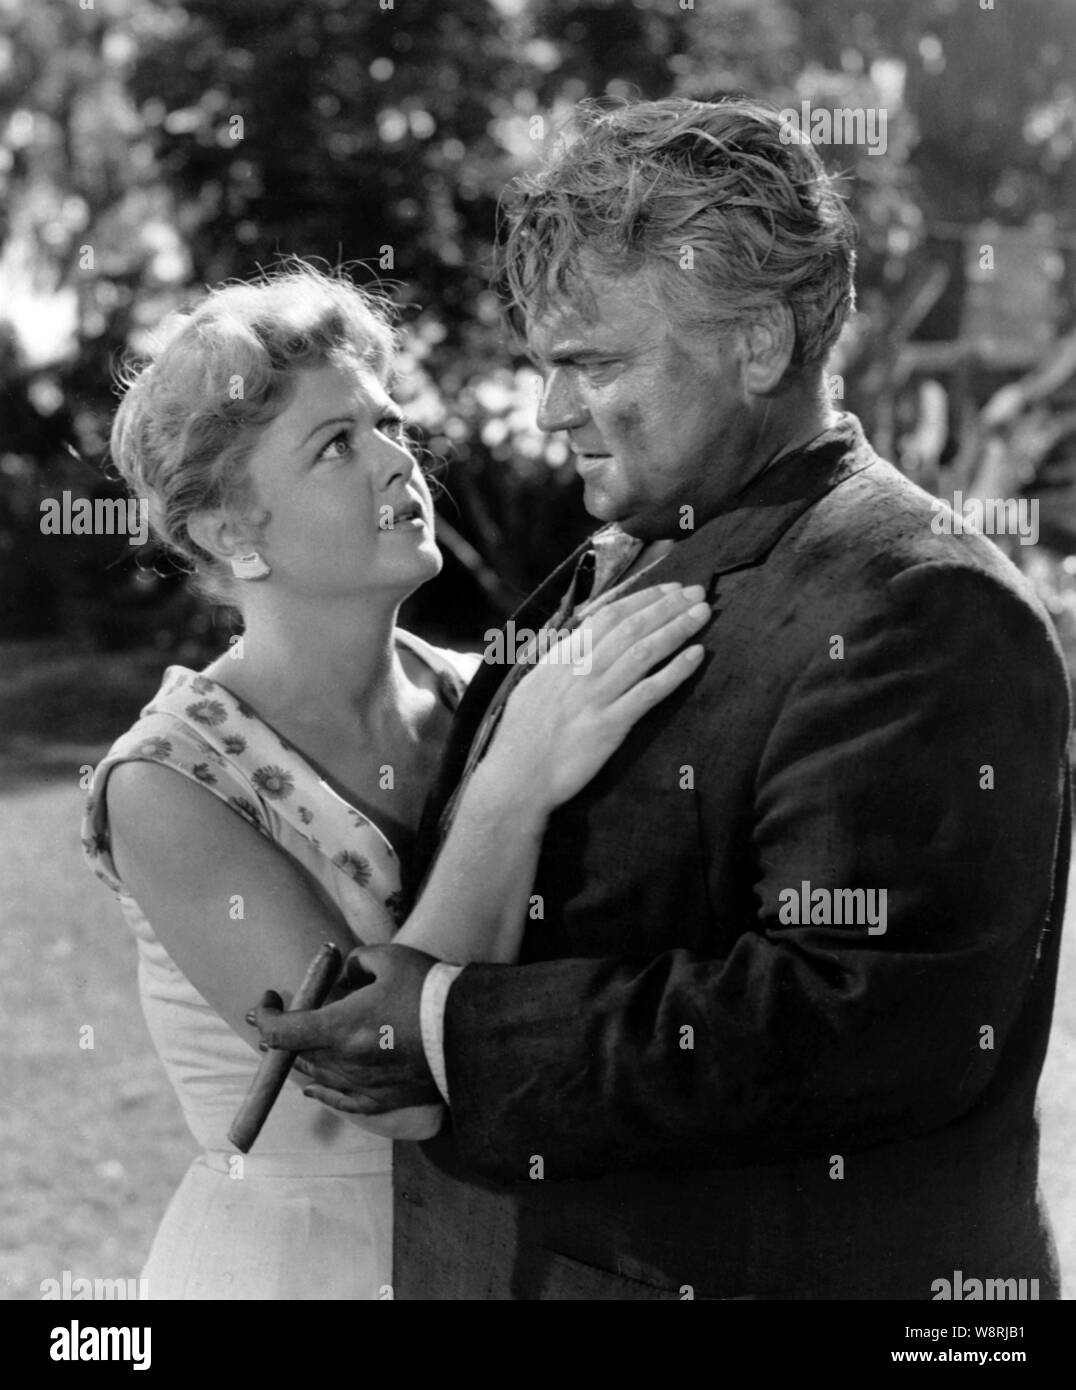 ANGELA LANSBURY and ORSON WELLES in LONG, HOT SUMMER, THE (1958), directed by MARTIN RITT. Credit: 20TH CENTURY FOX / Album Stock Photo